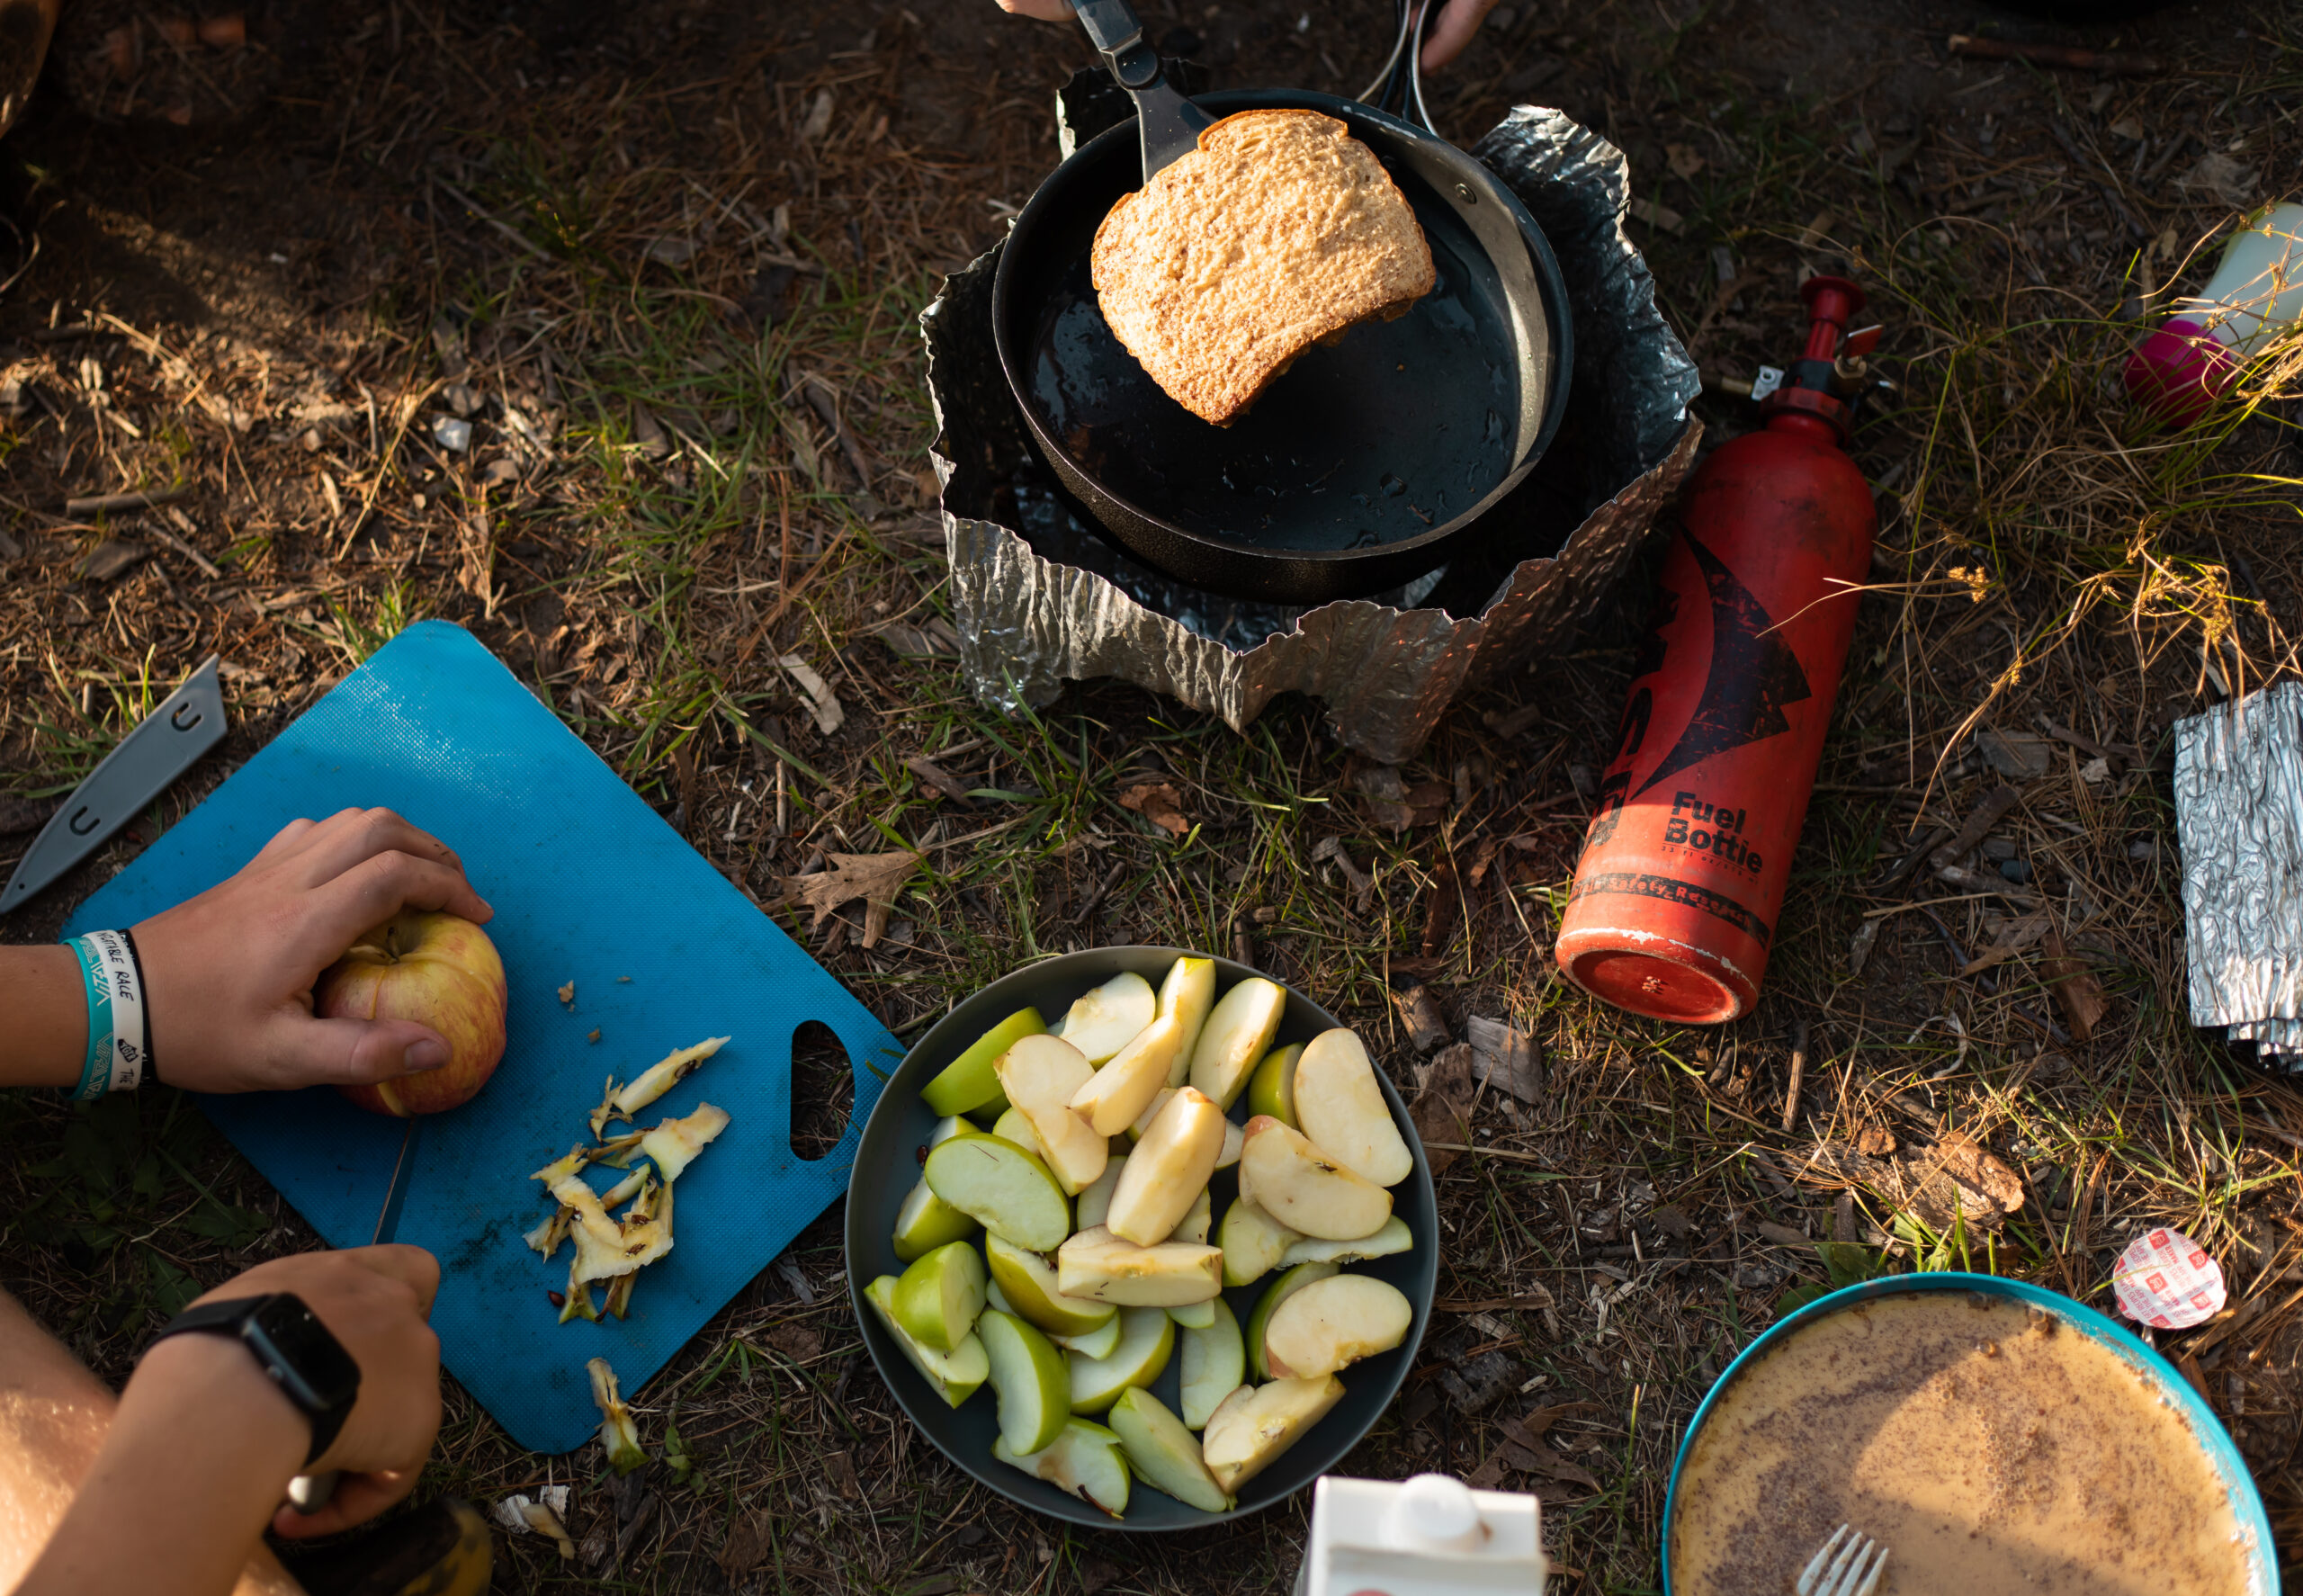 camping food preparation, cutting board with apples, and a backcountry stove flipping bread